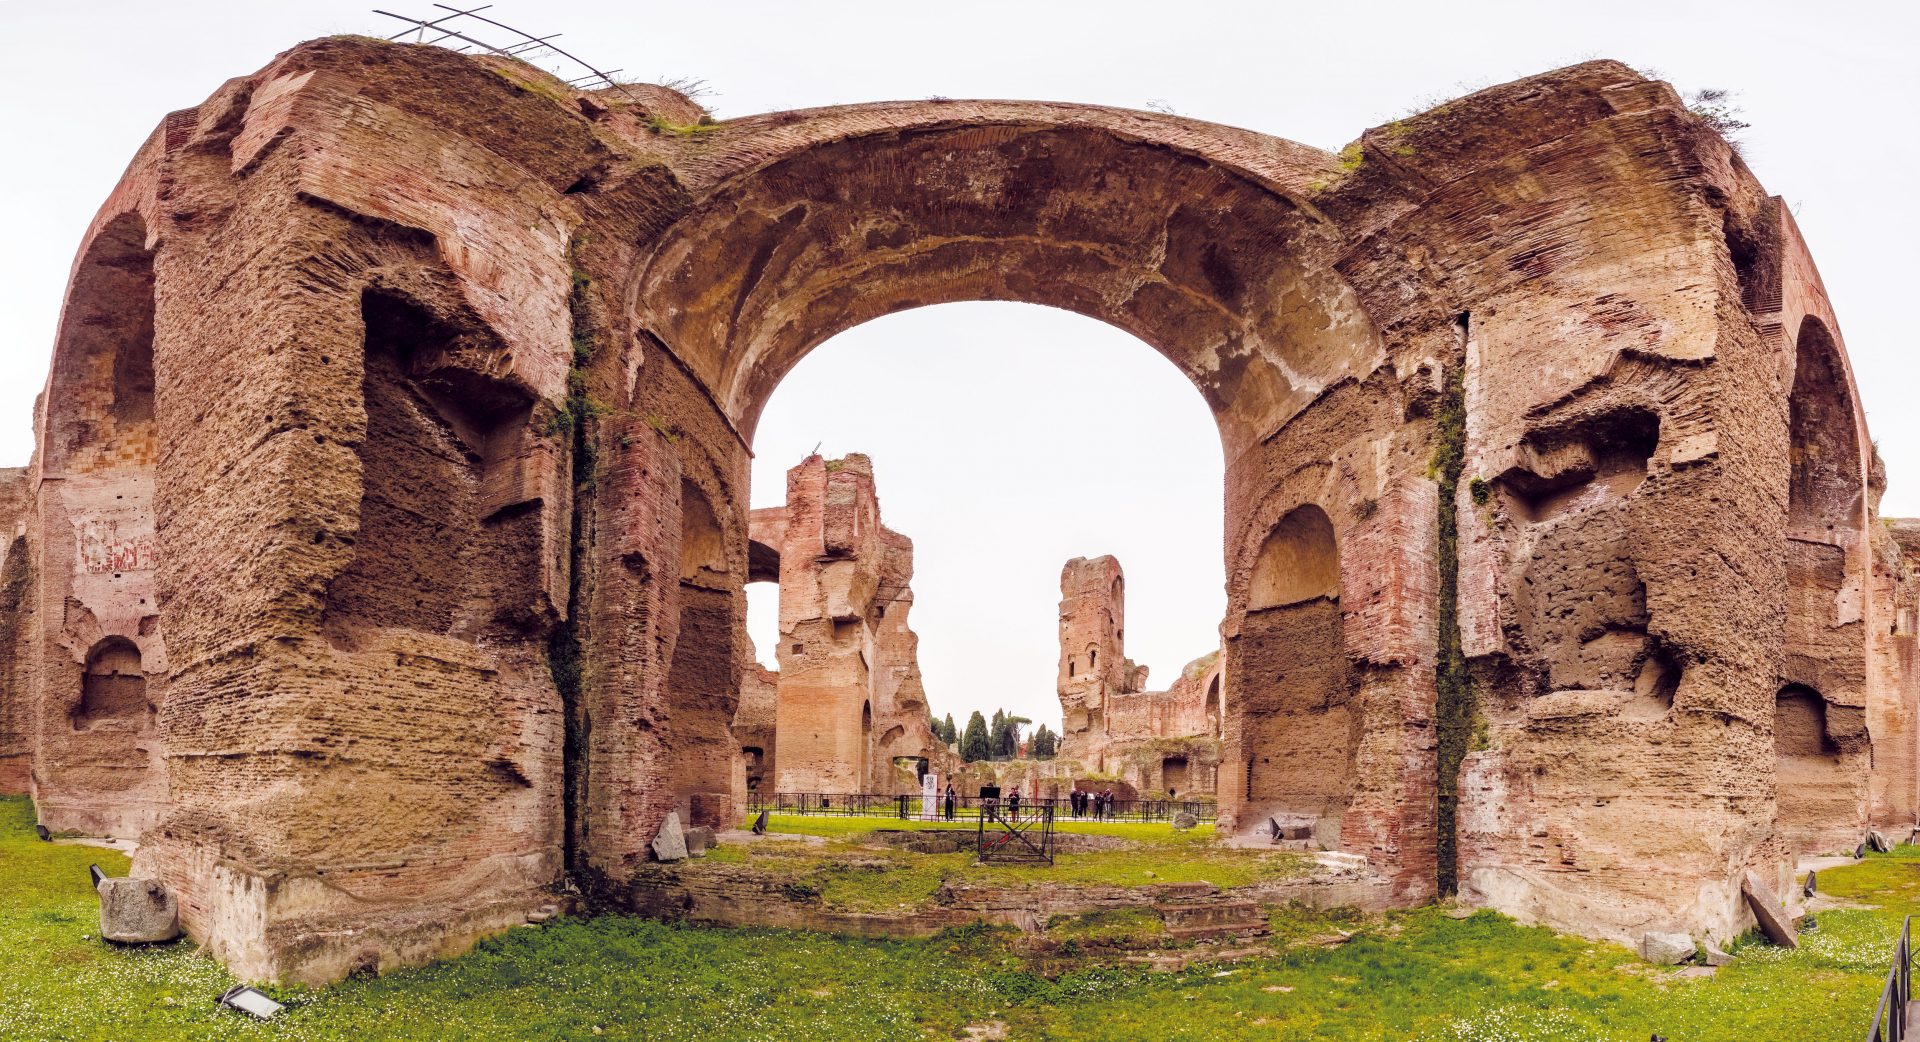 The ruins of the Baths of Caracalla, still majestic even without the Golden Arches. Photo: Frank Bienewald/Getty.